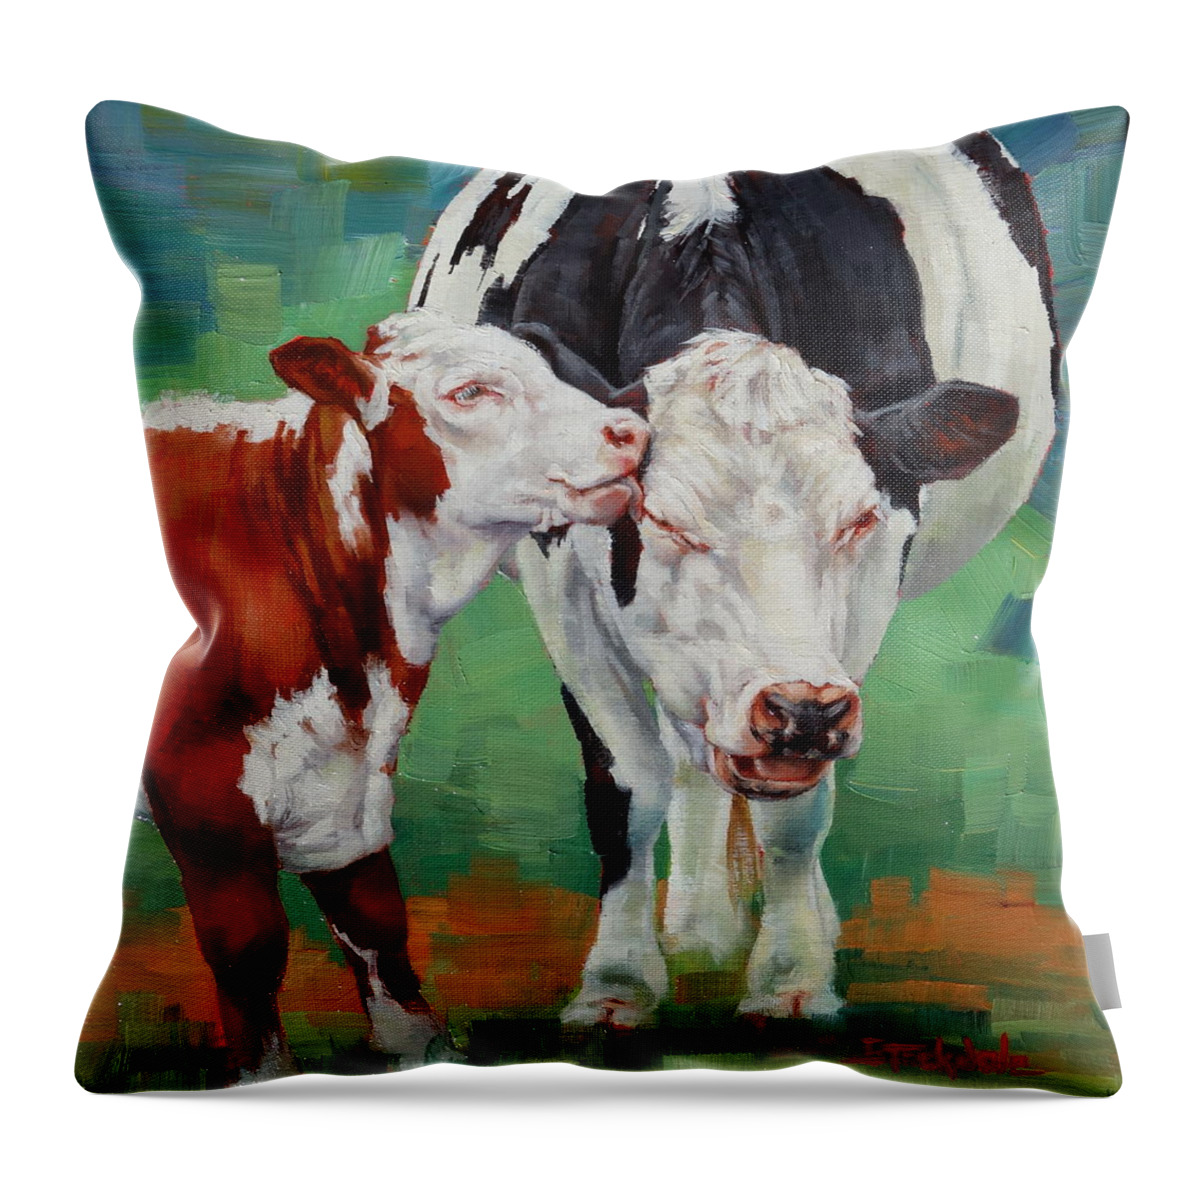 Cows Throw Pillow featuring the painting Mother And Son by Margaret Stockdale